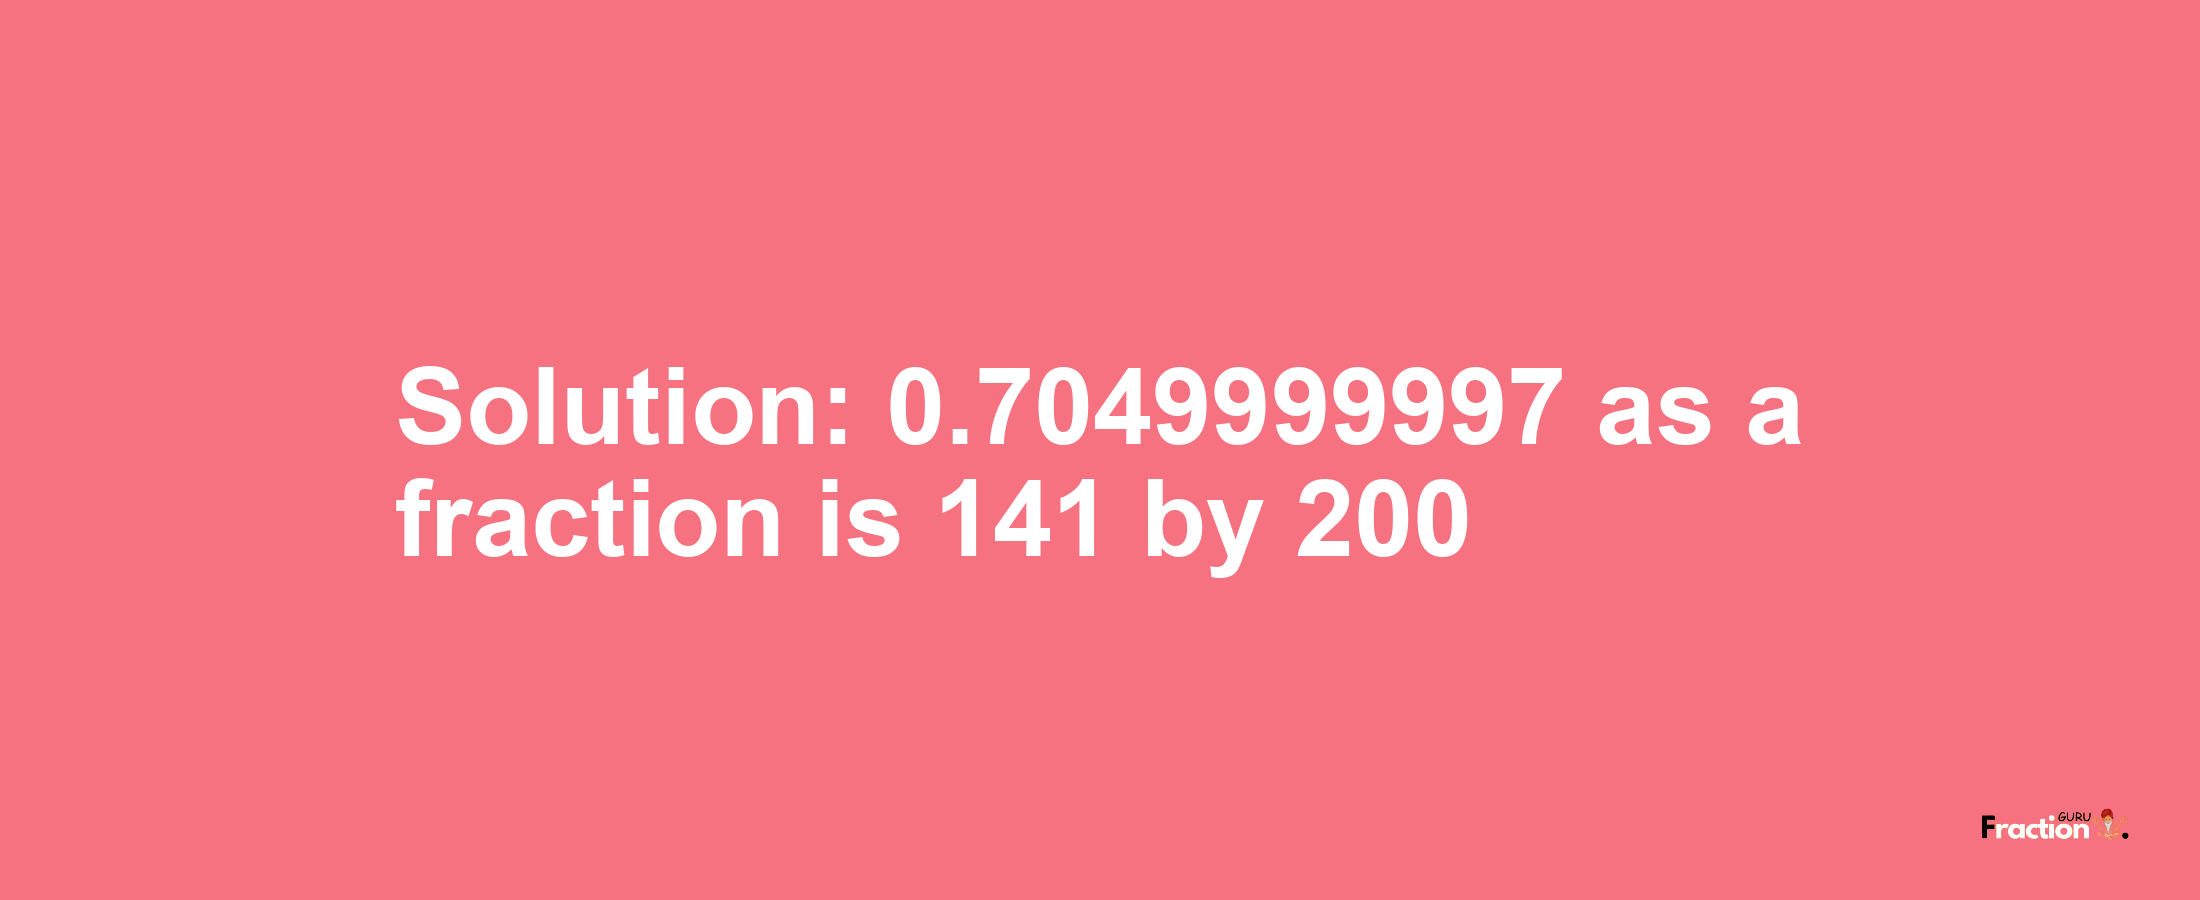 Solution:0.7049999997 as a fraction is 141/200